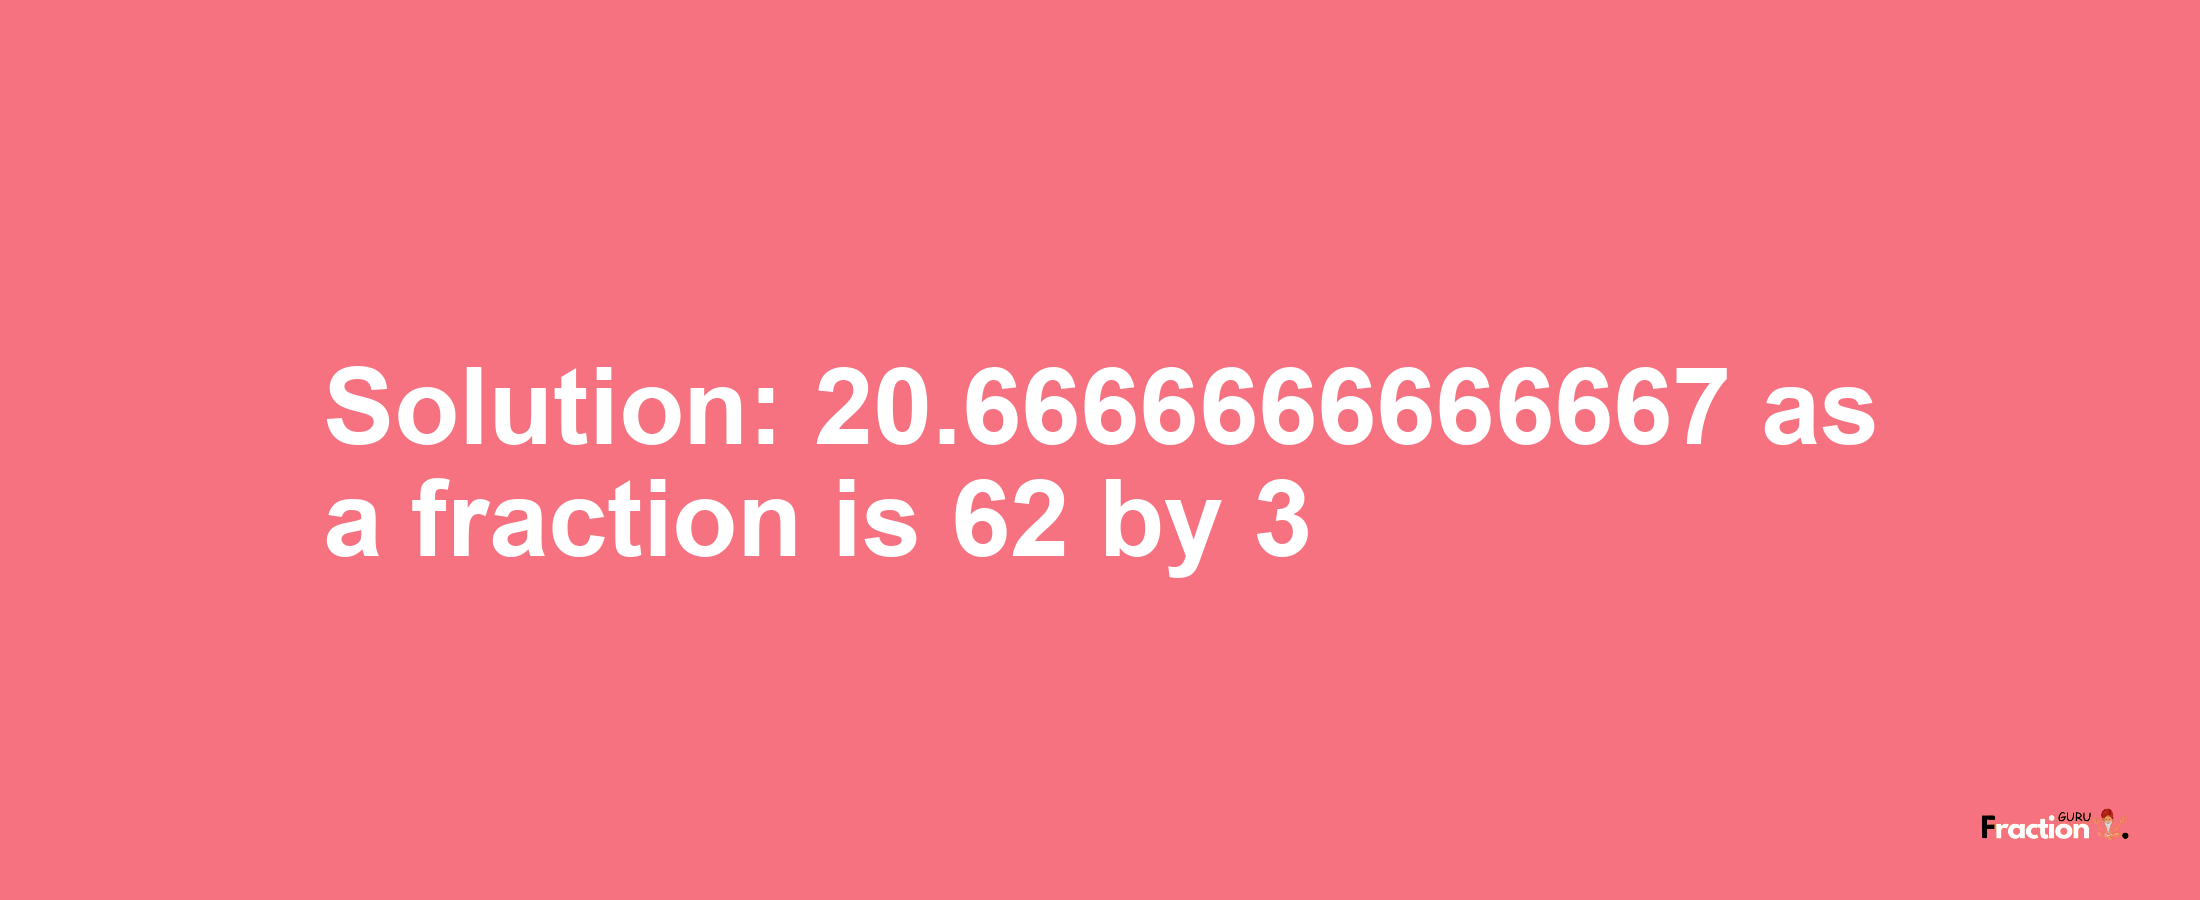 Solution:20.6666666666667 as a fraction is 62/3